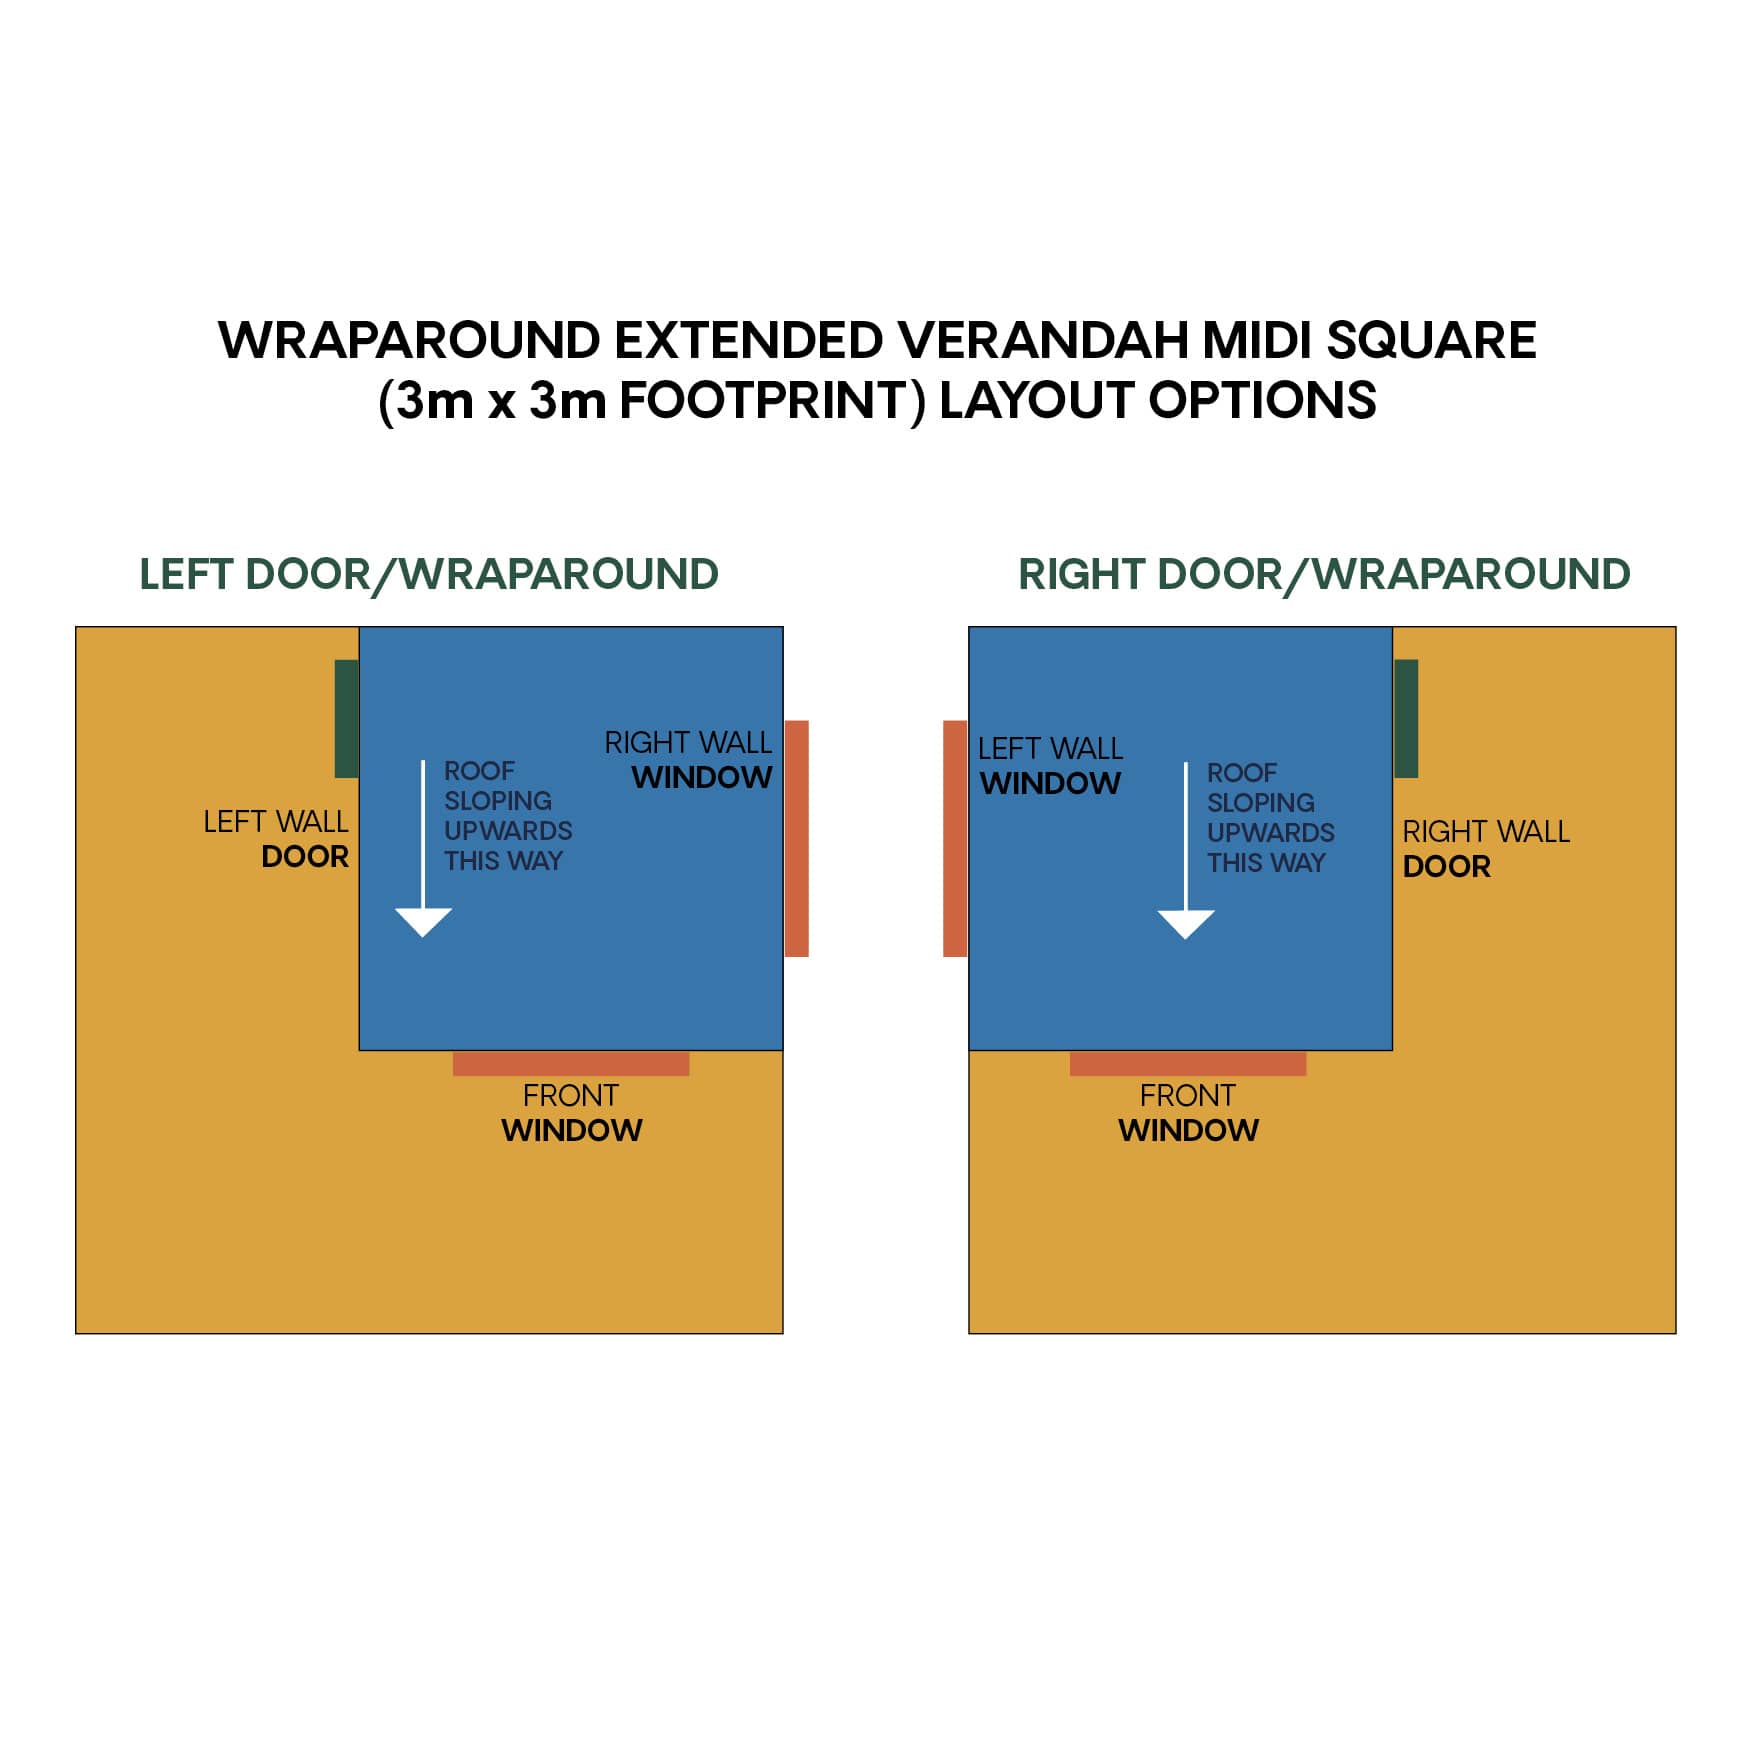 Layout options for midi square cubby with wraparound verandah